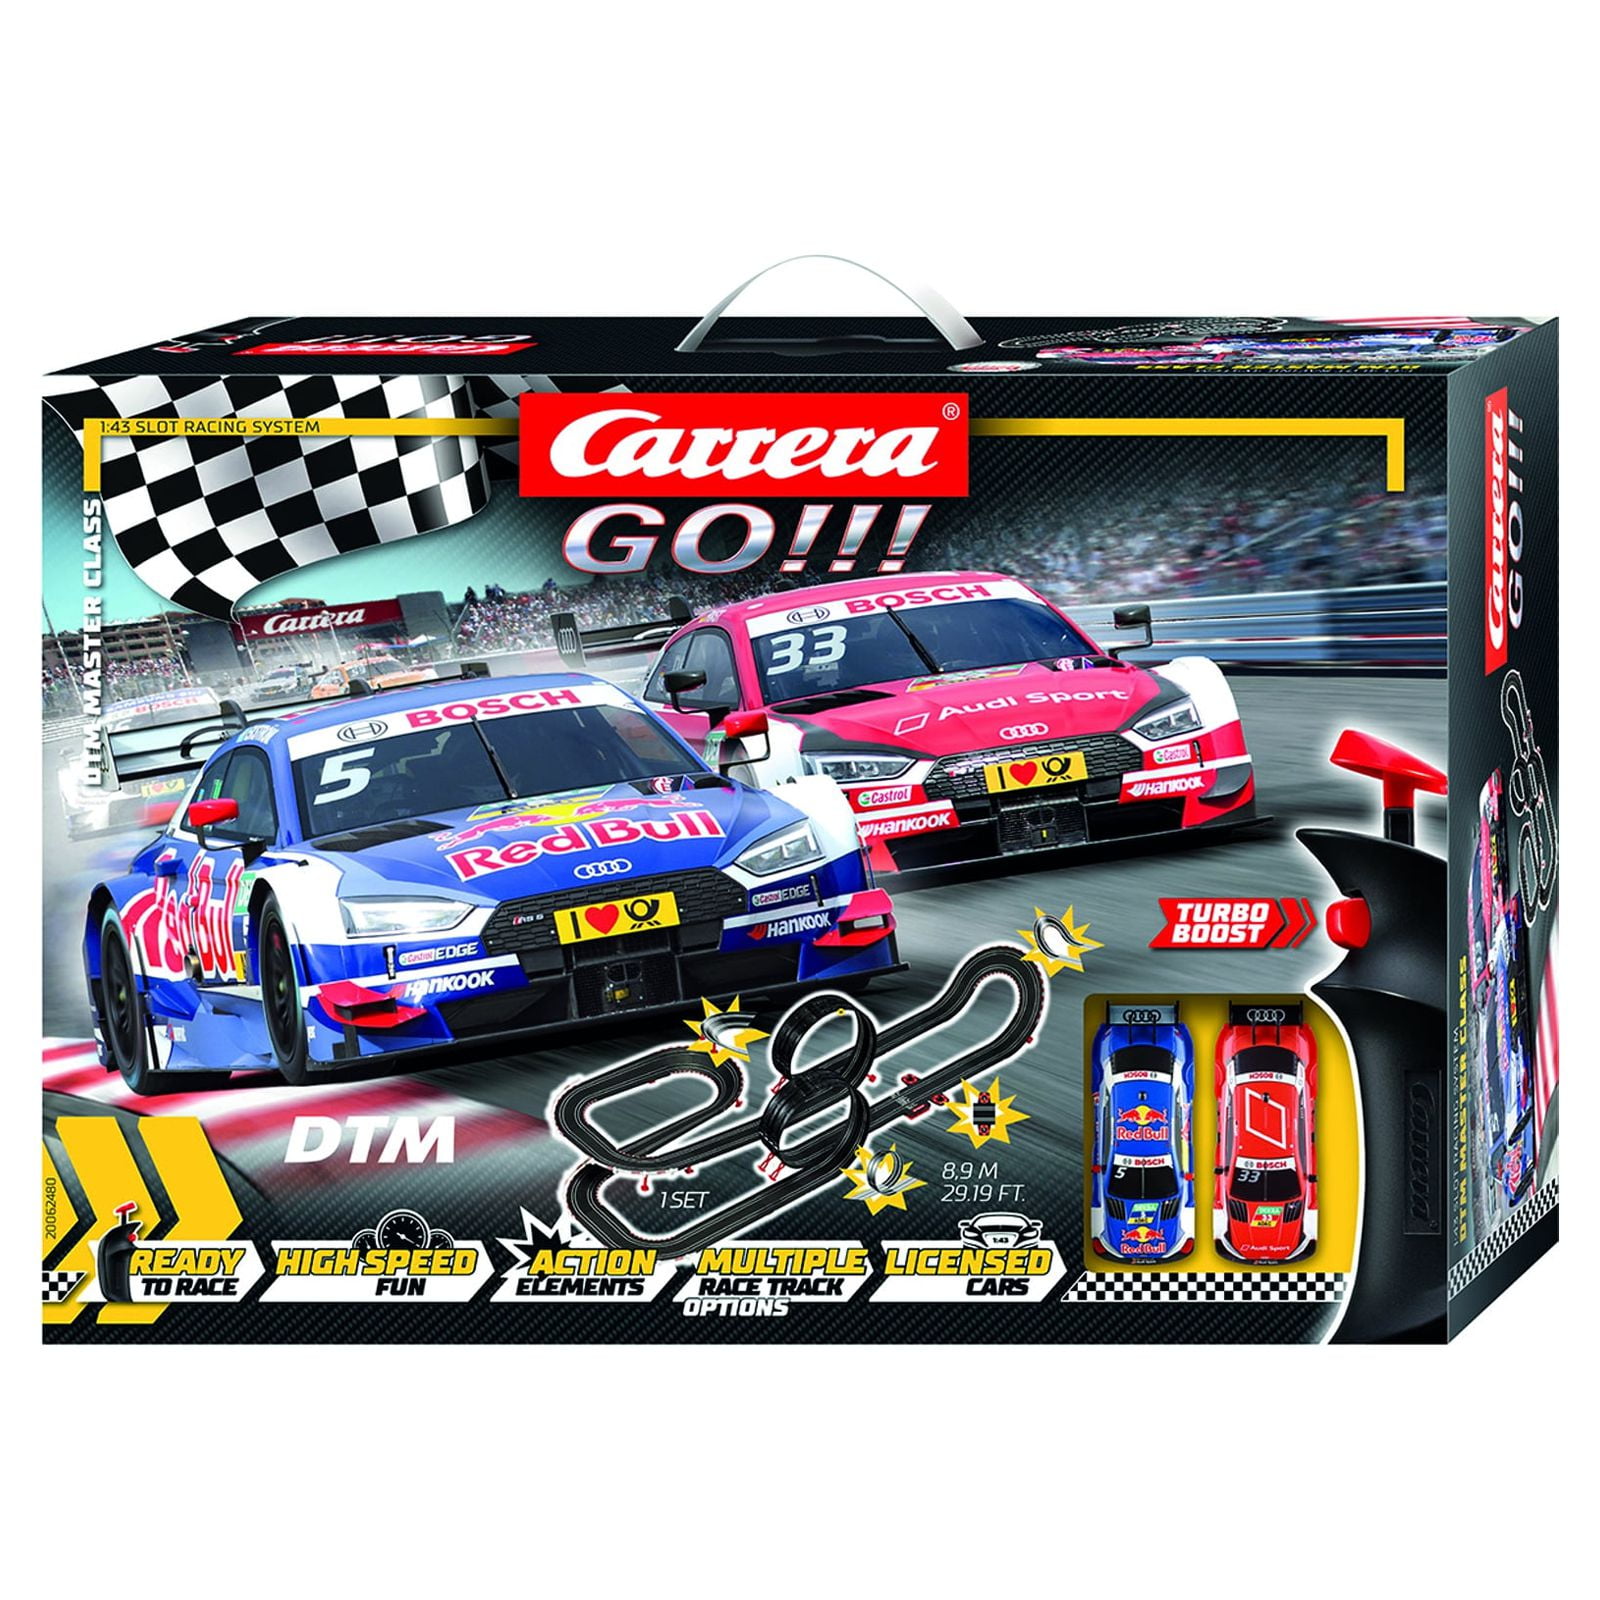  Carrera GO!!! Electric Powered Slot Car Racing Kids Toy Race  Track Set 1:43 Scale, DTM Power Run : Toys & Games